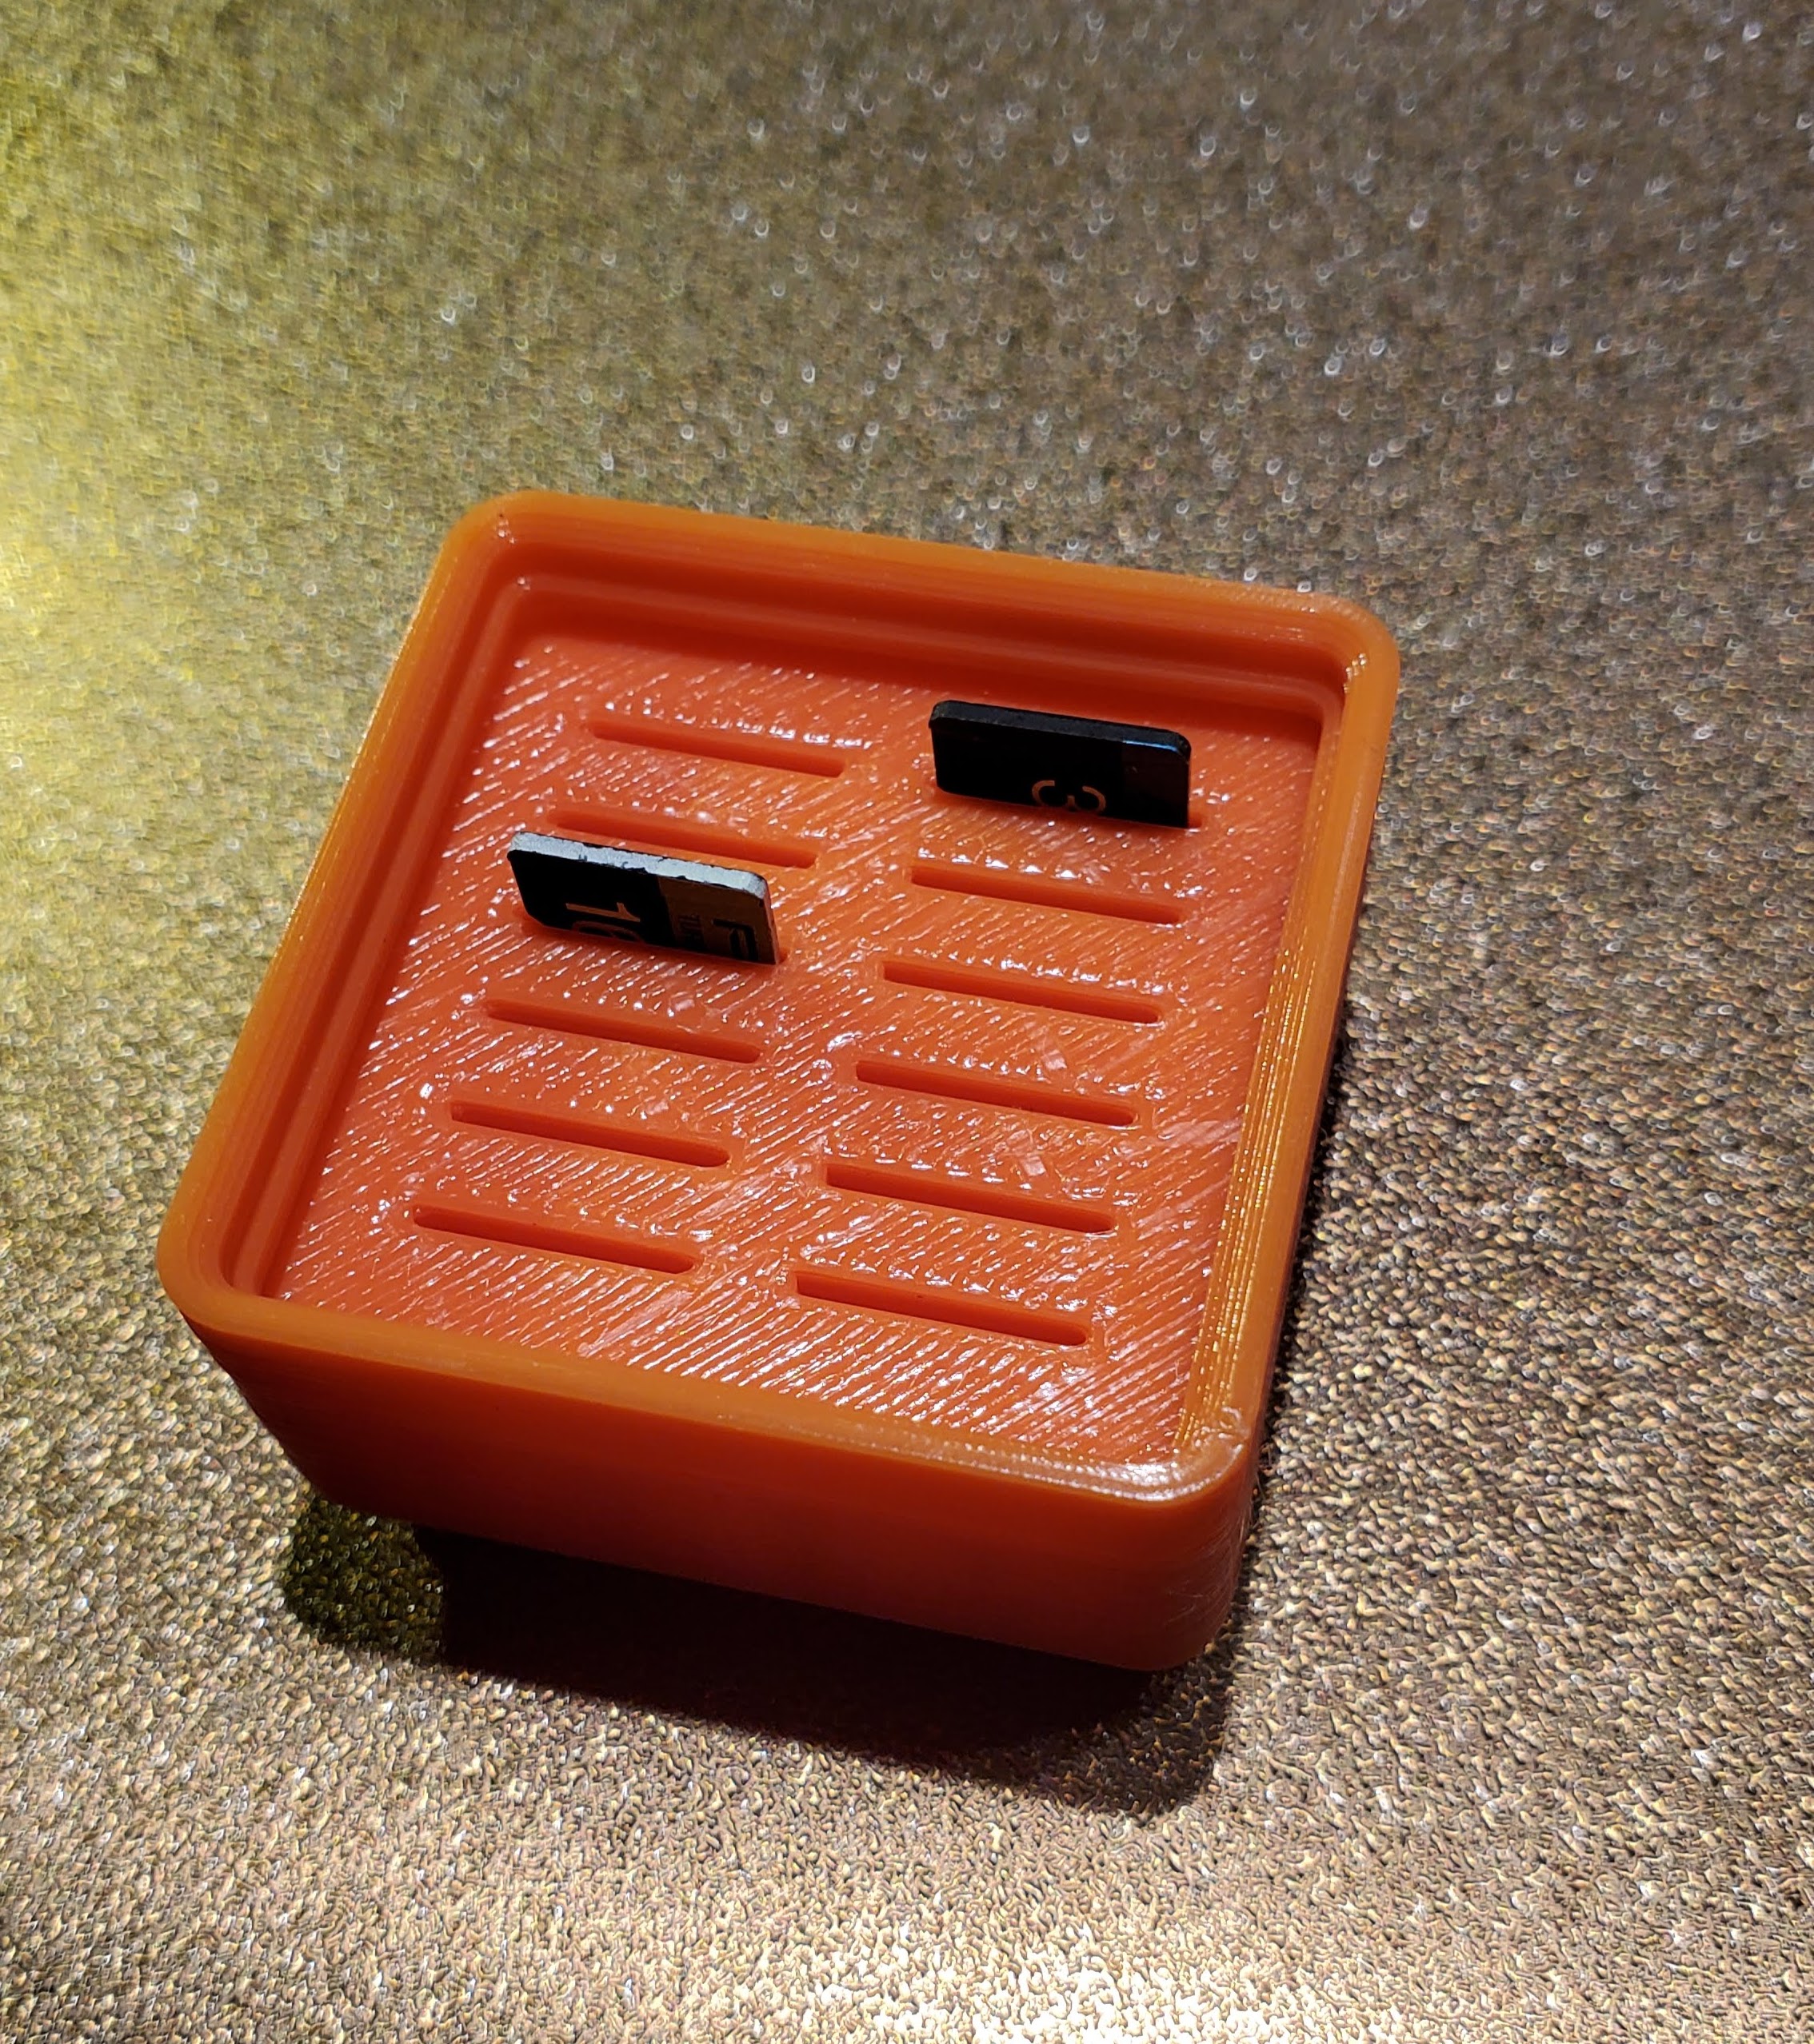 Gridfinity Micro SD card holder 1x1x3 (added step file)